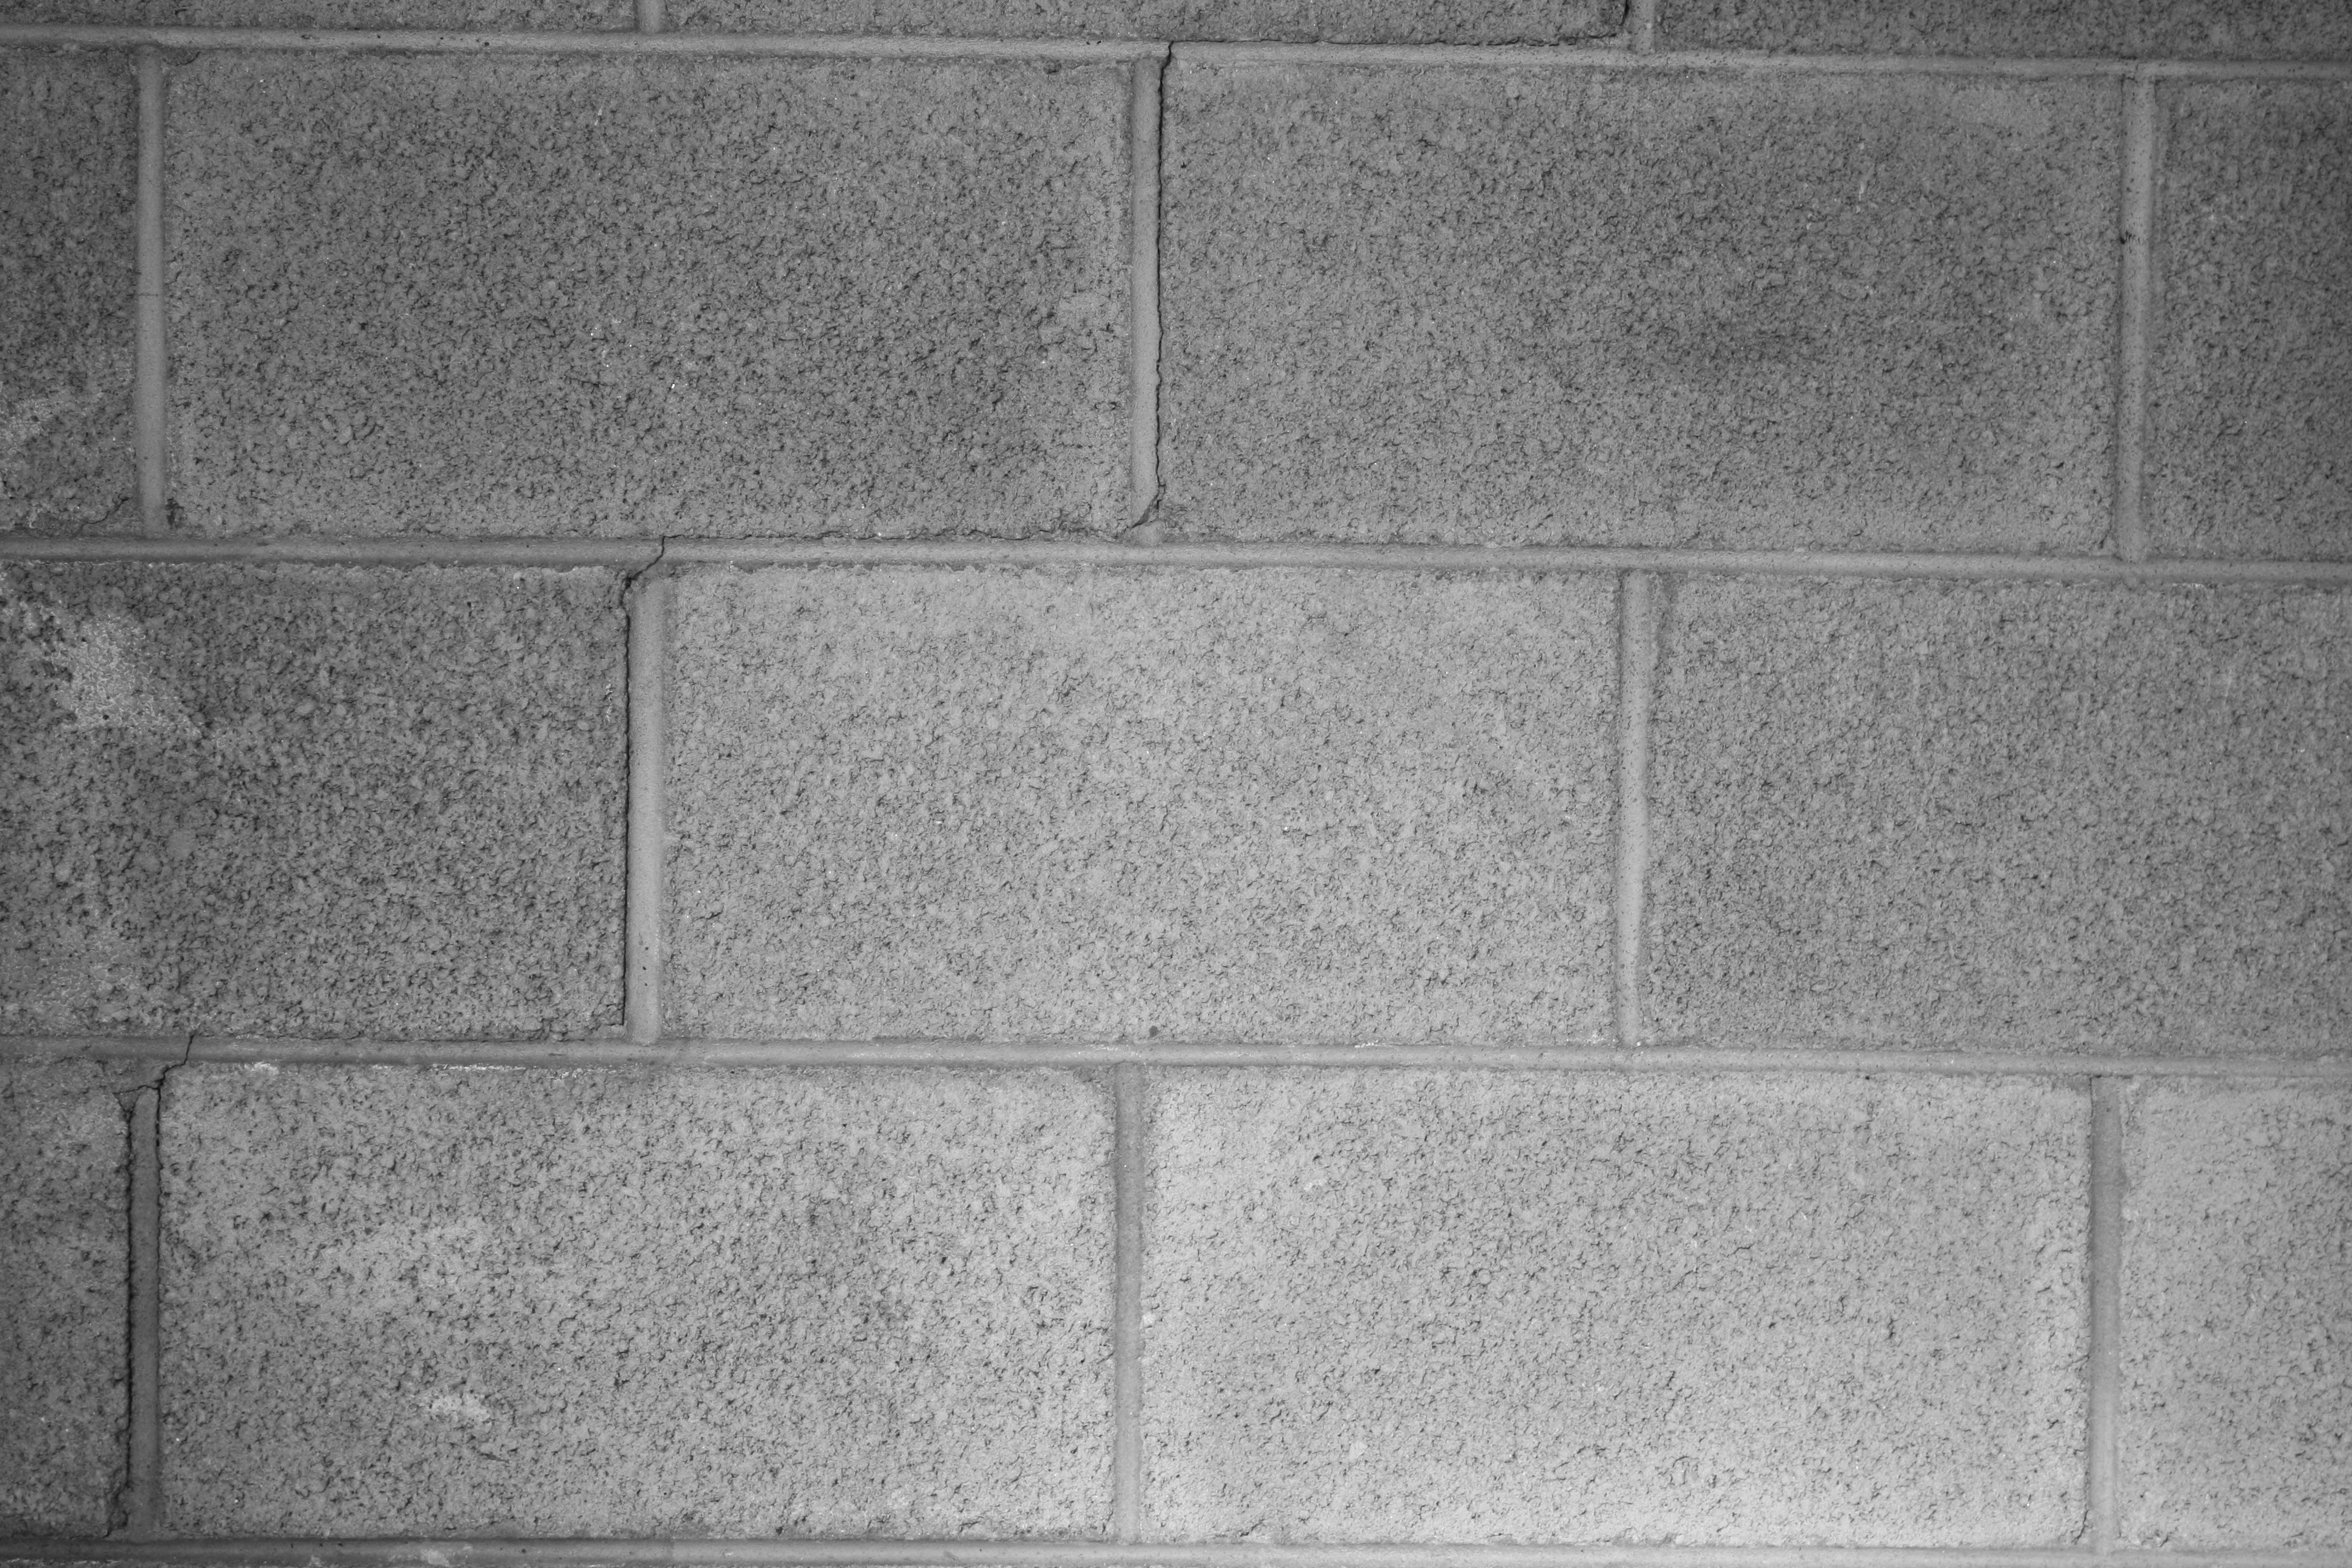 Cinder Block Wall Texture Picture   Free Photograph   Photos